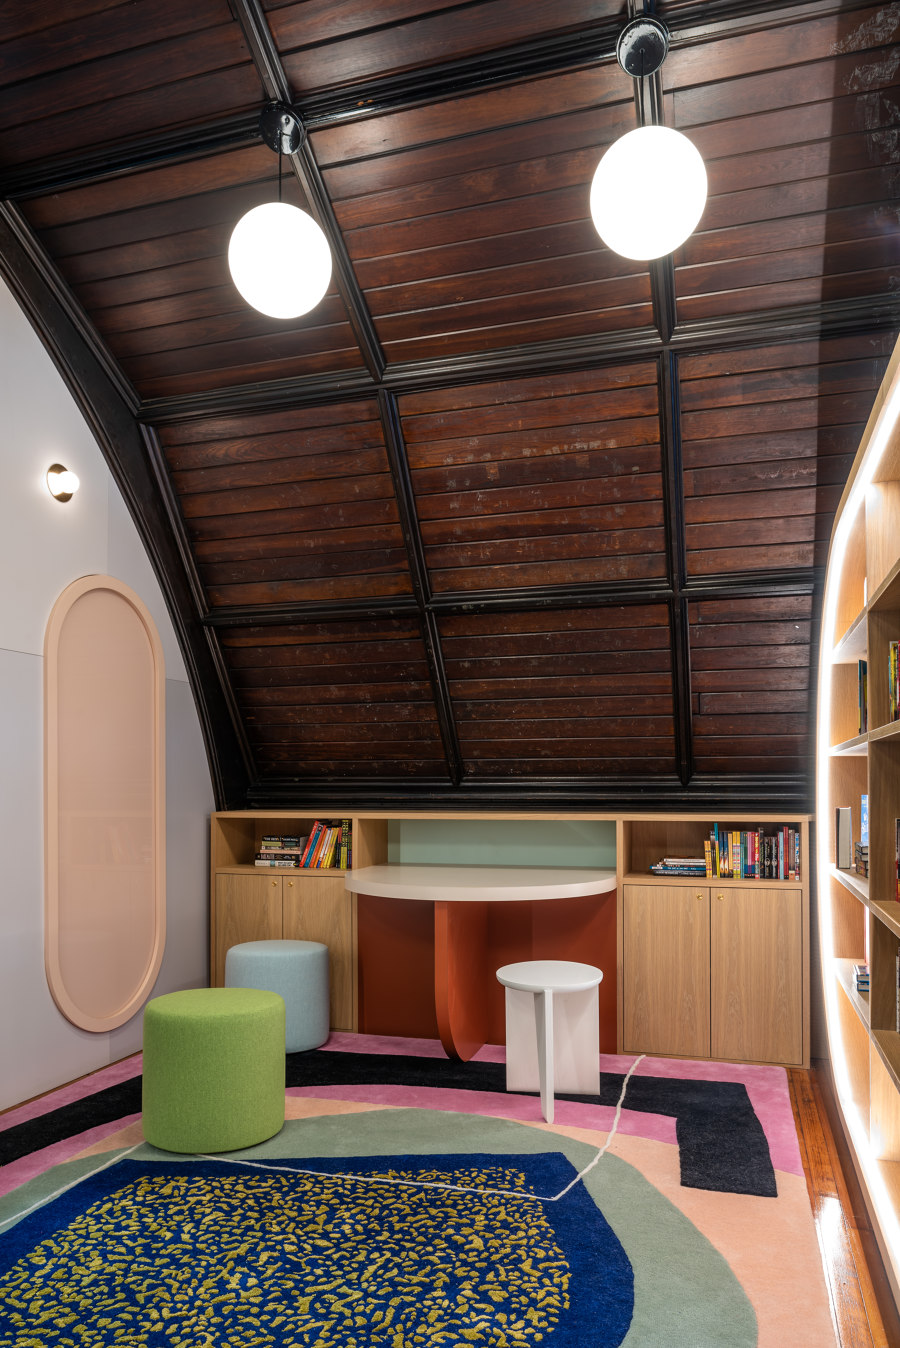 The Children’s Library at Concourse House by MICHAEL K CHEN ARCHITECTURE MKCA | Libraries